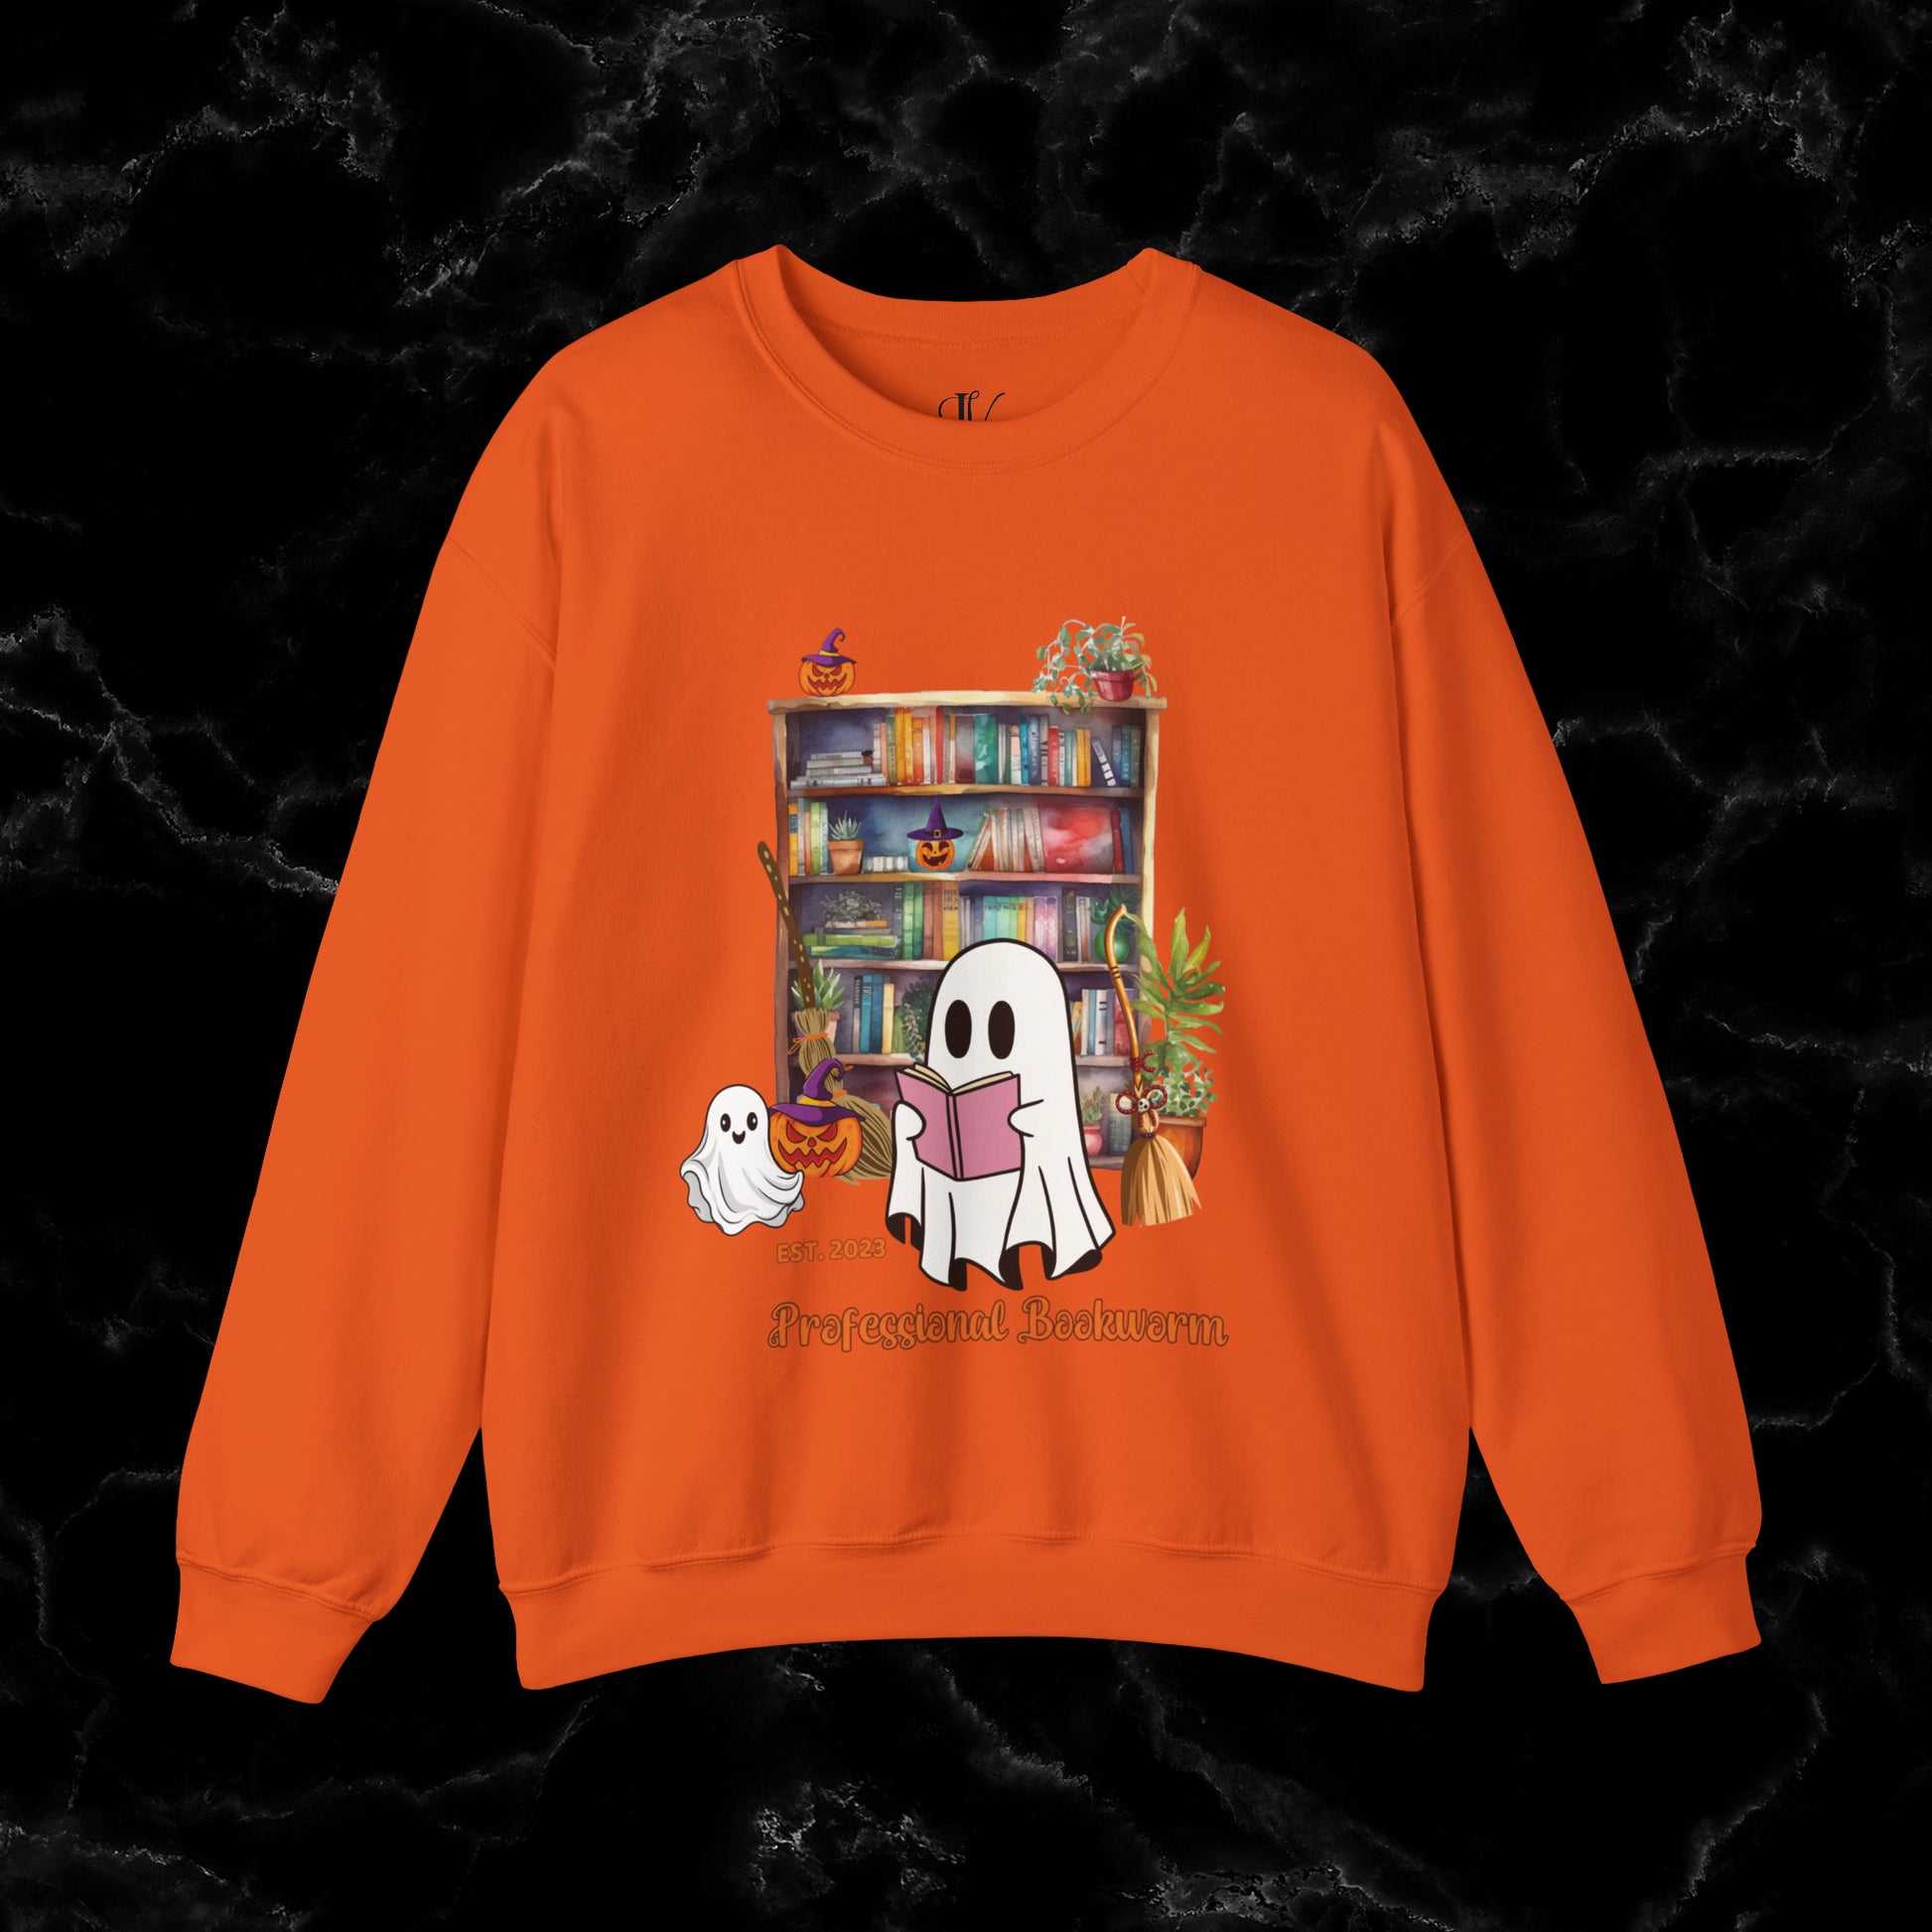 Witchy Gifts for Book Lover Cottagecore Pumpkin Witch Sweatshirt - Bookworm Back To School Reading Fall Sweater, Perfect Present for Bookworm Aunt's Birthday Sweatshirt S Orange 